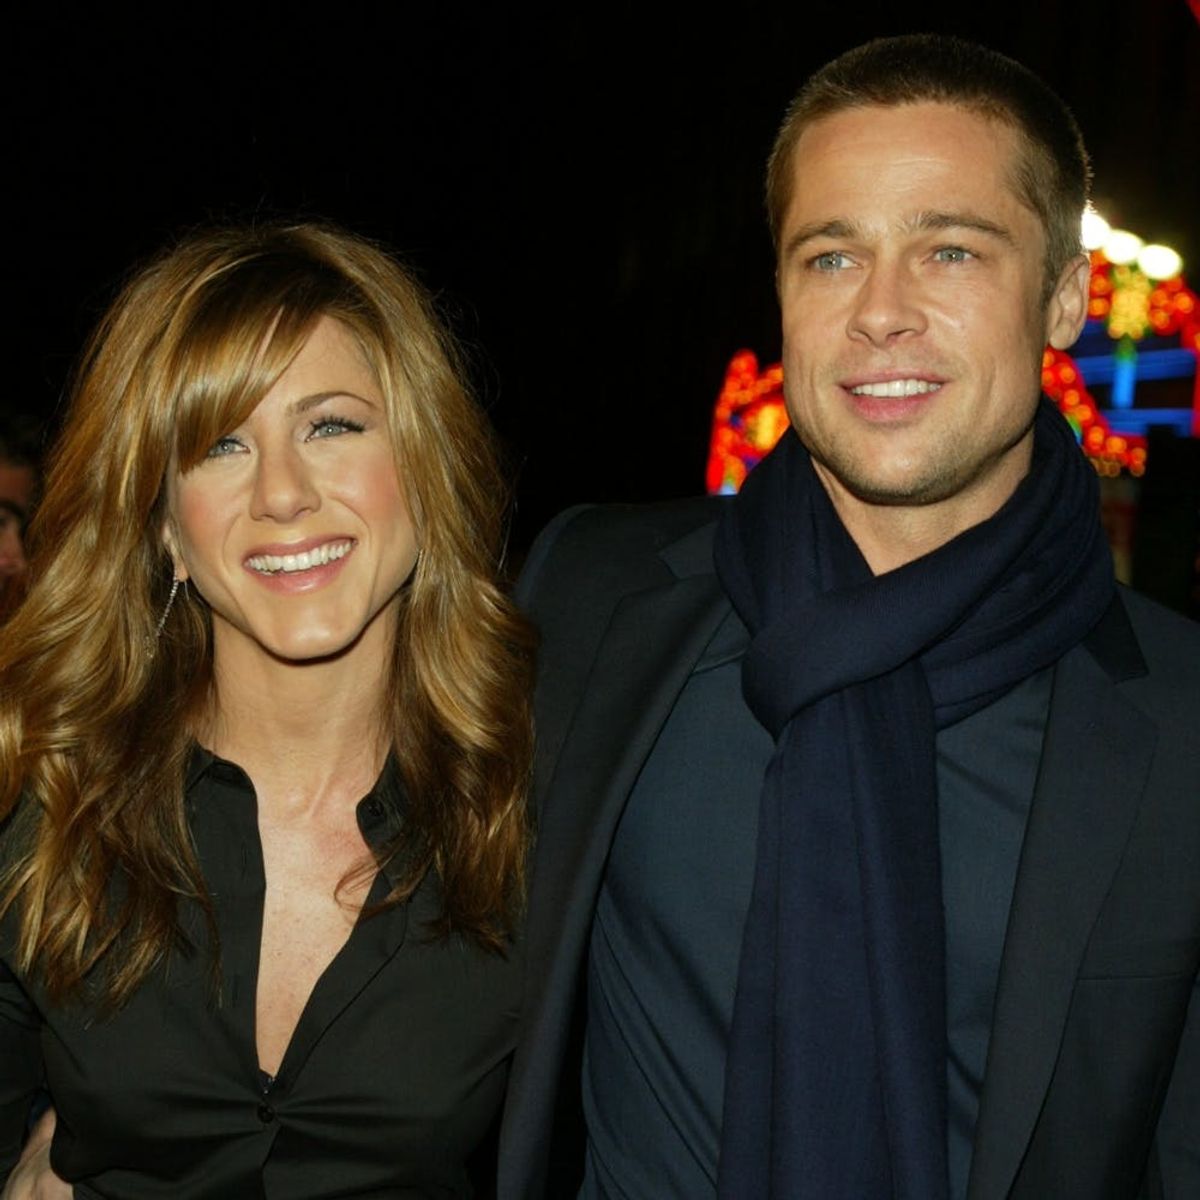 Jennifer Aniston and Brad Pitt Have Reconnected and Are Texting Again